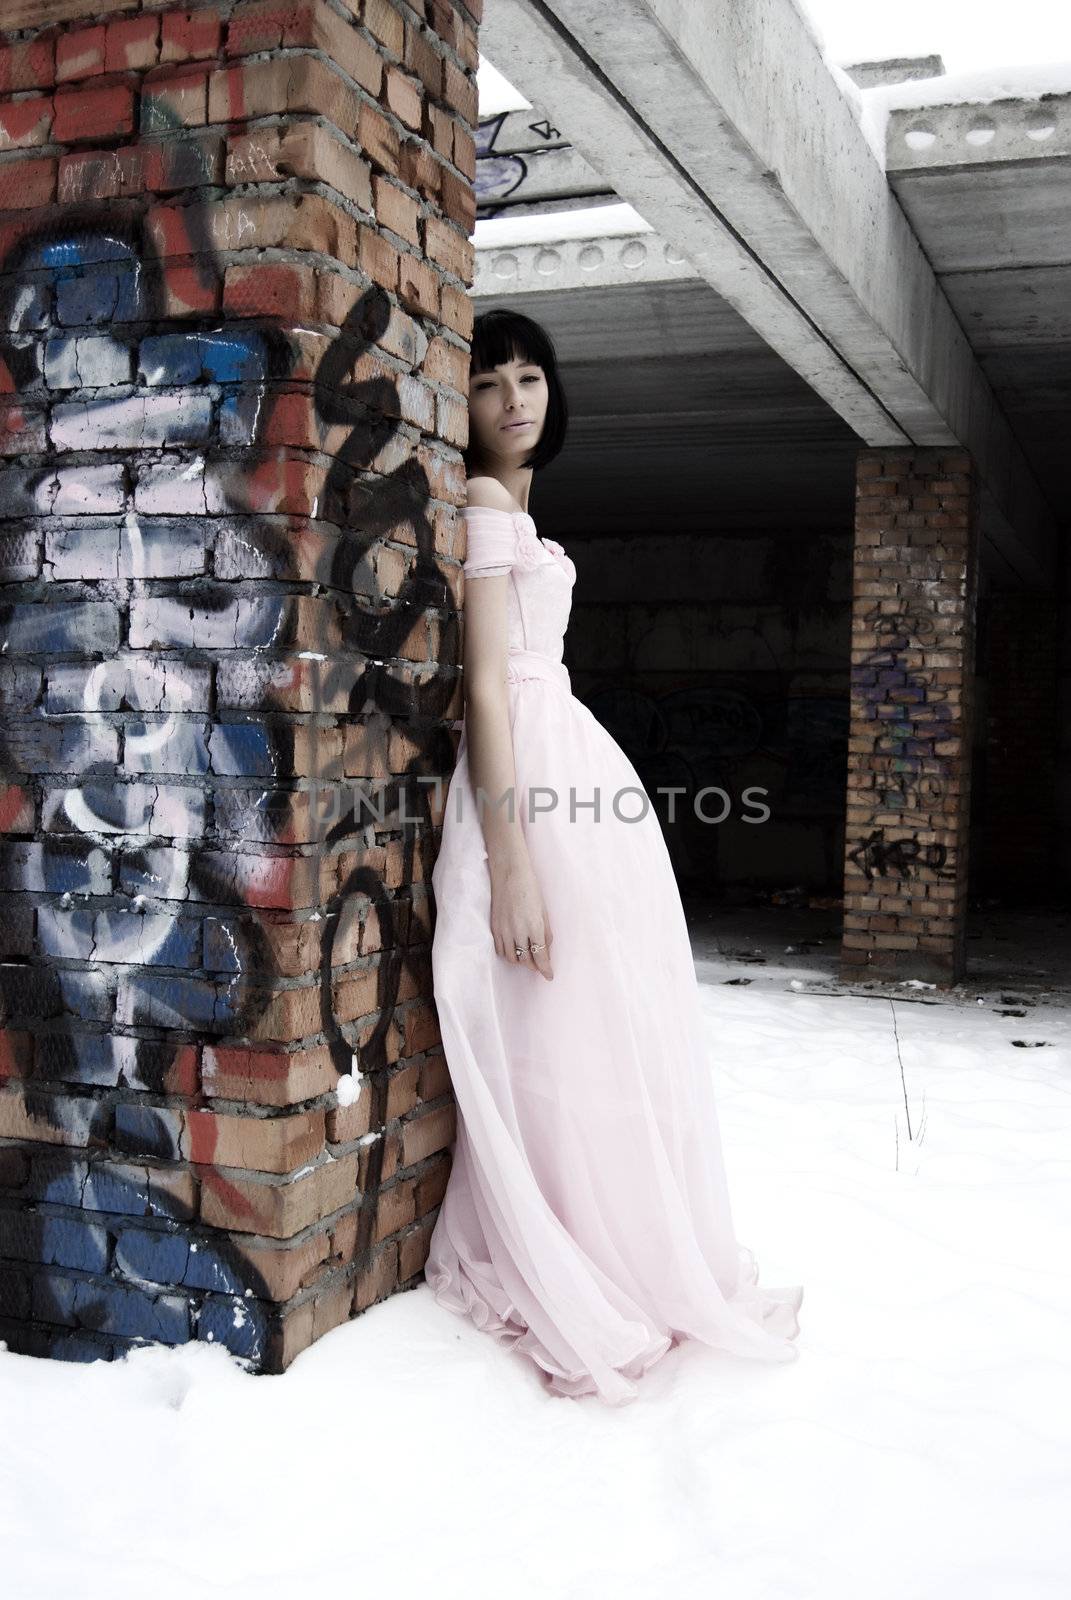 young bride in pink wedding dress standing among street ruins